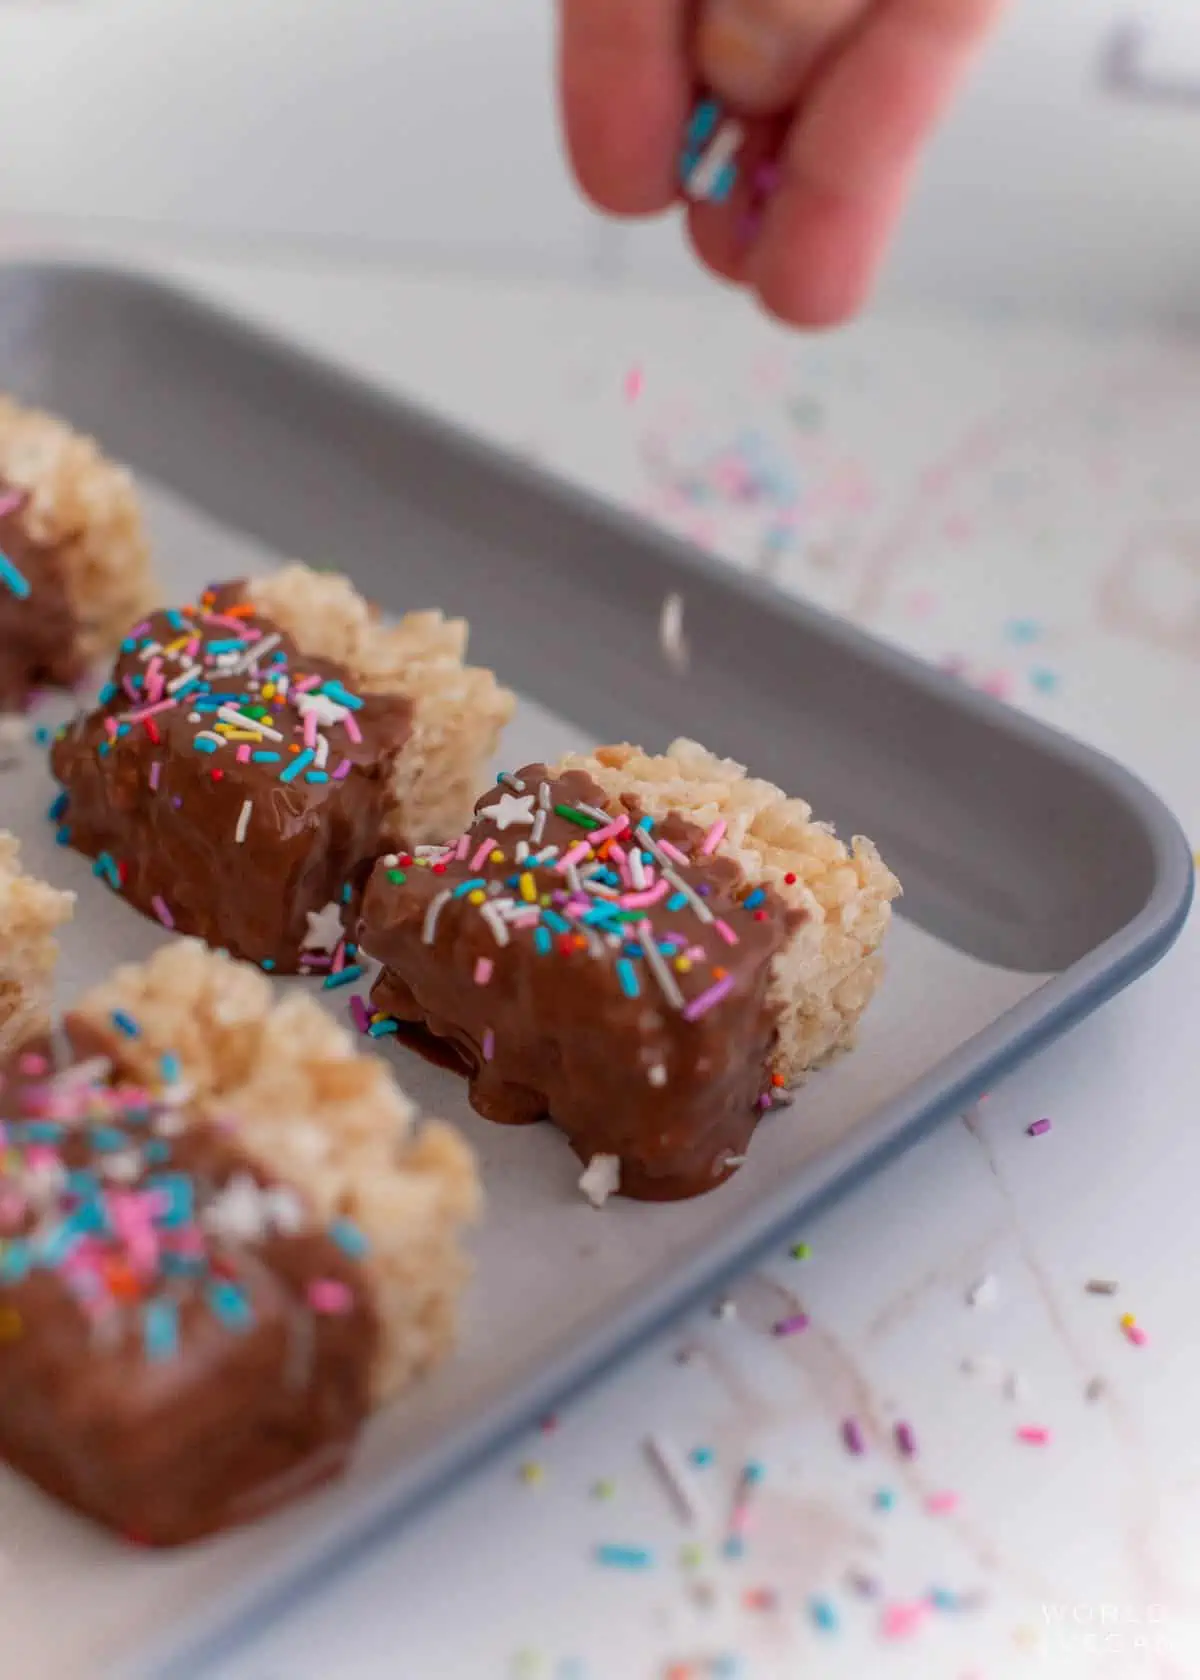 adding sprinkles to melted chocolate covered rice krispies